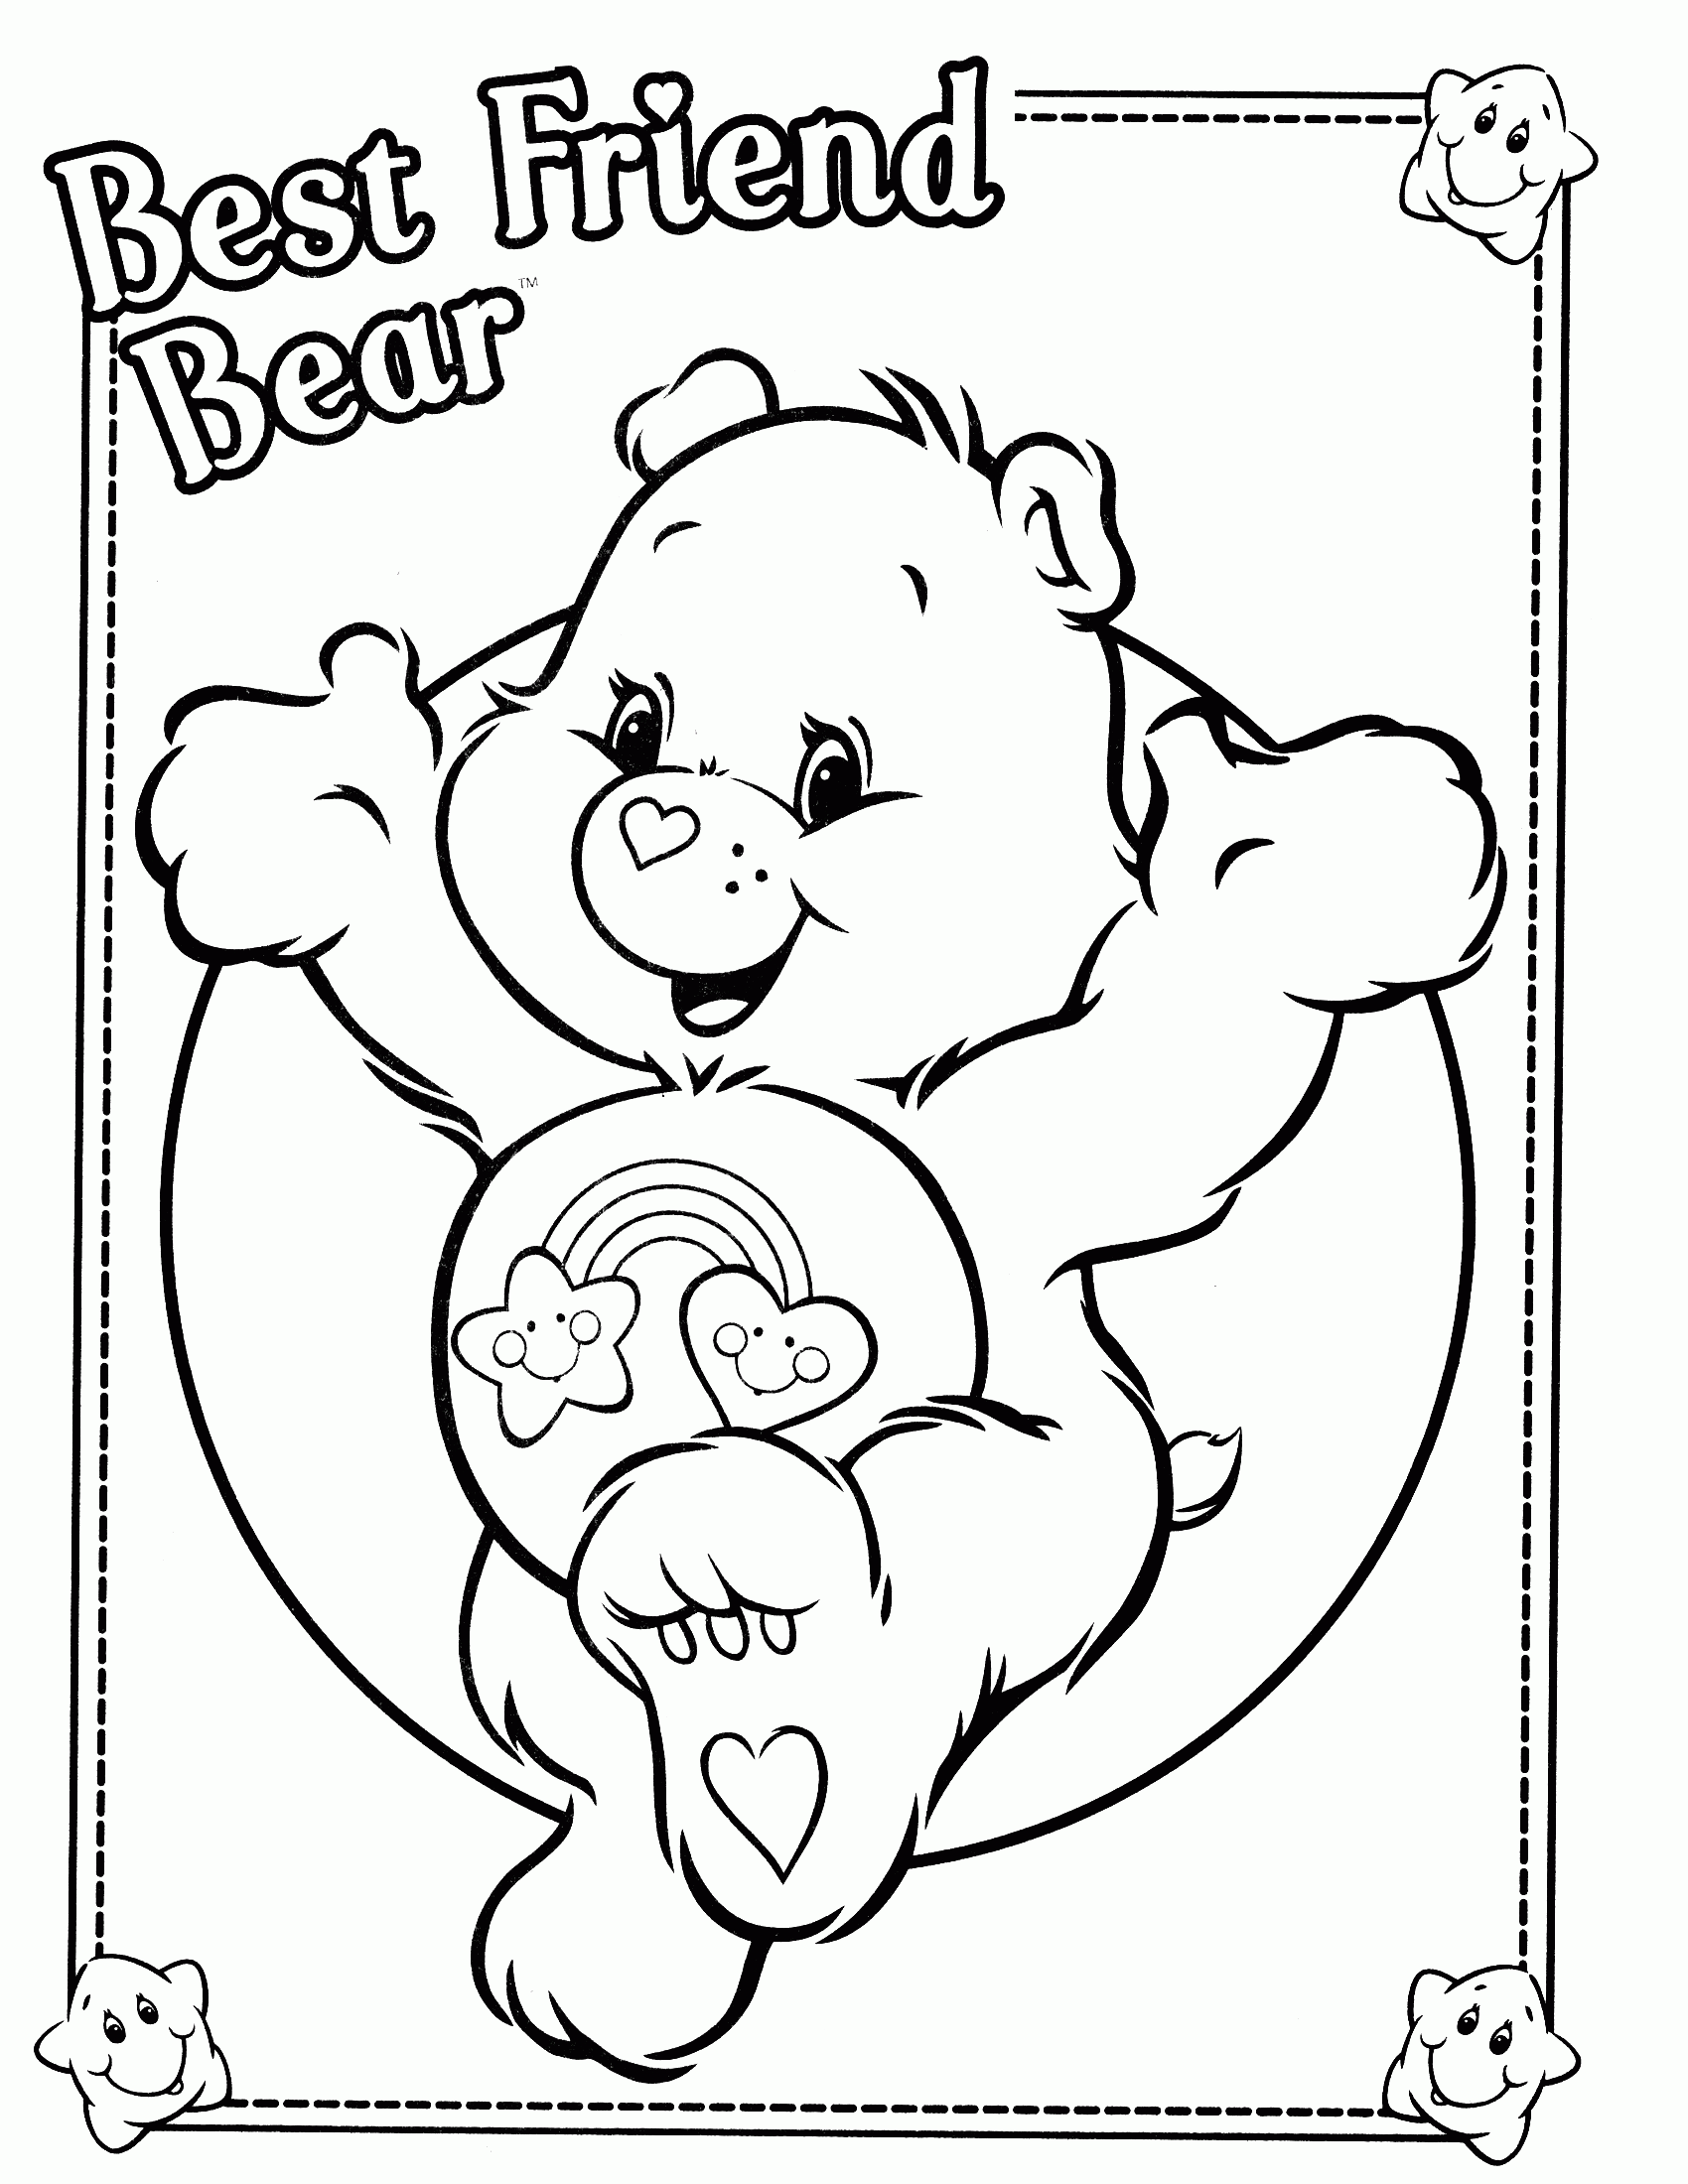 Coloring for Kids and for Adults